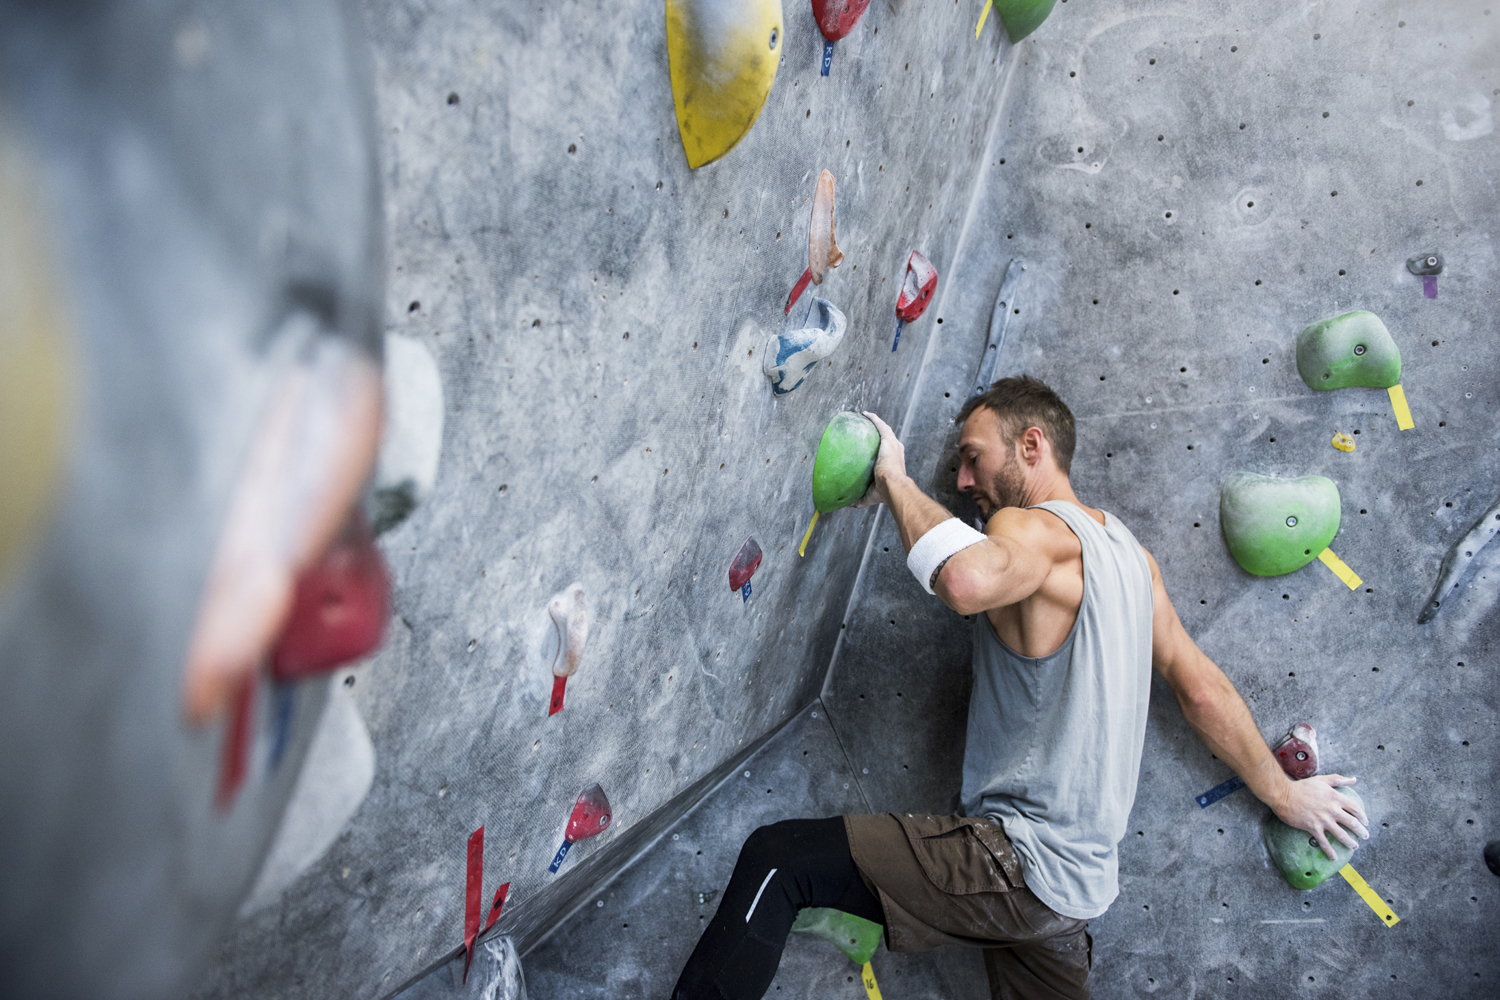 This New Climbing Workout Can Burn Up to 800 Calories in 30